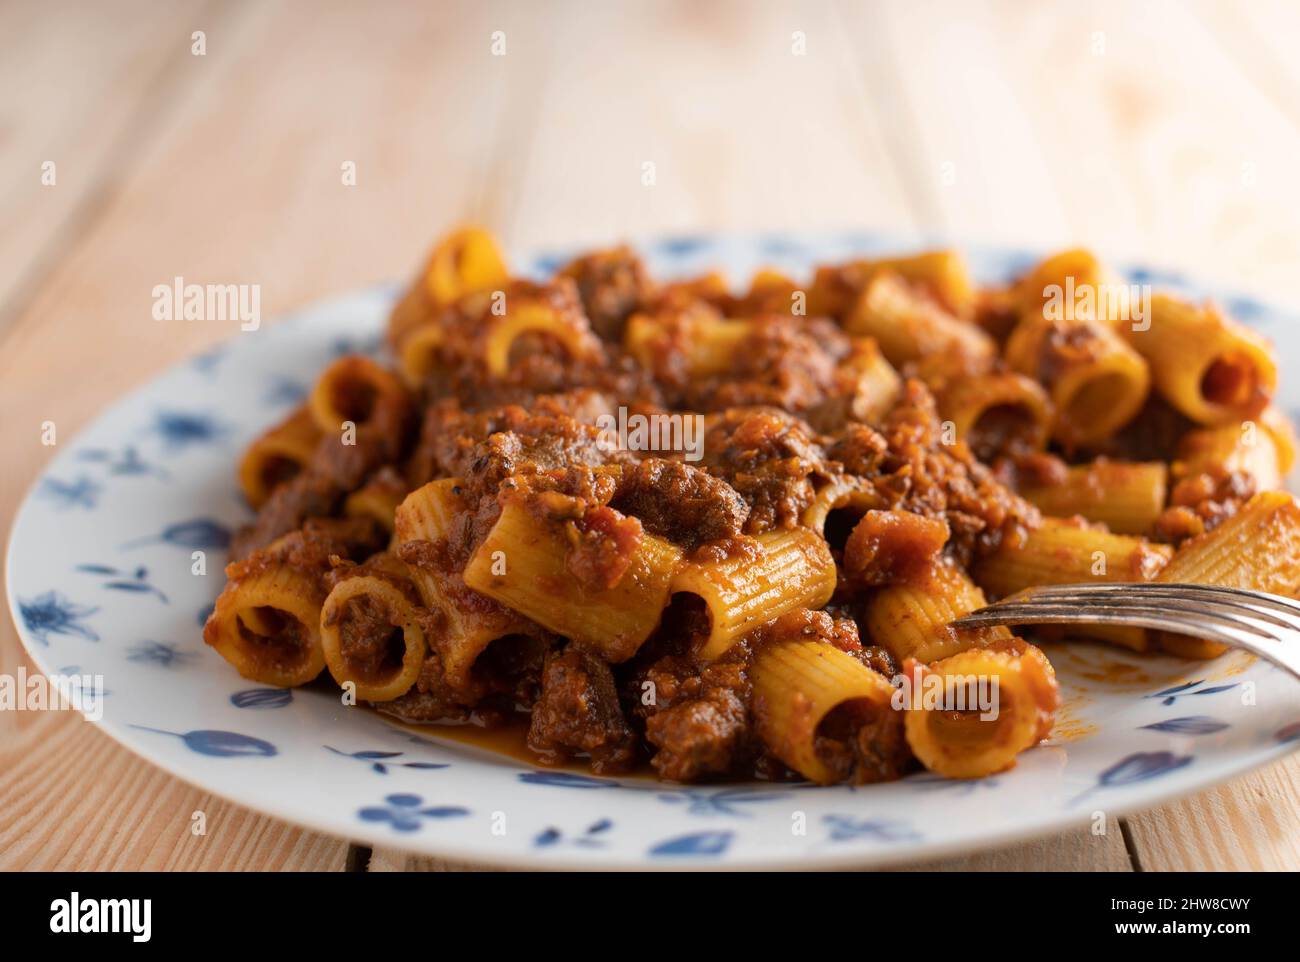 Rigatoni or penne with bolognese sauce on a plate. Closeup Stock Photo